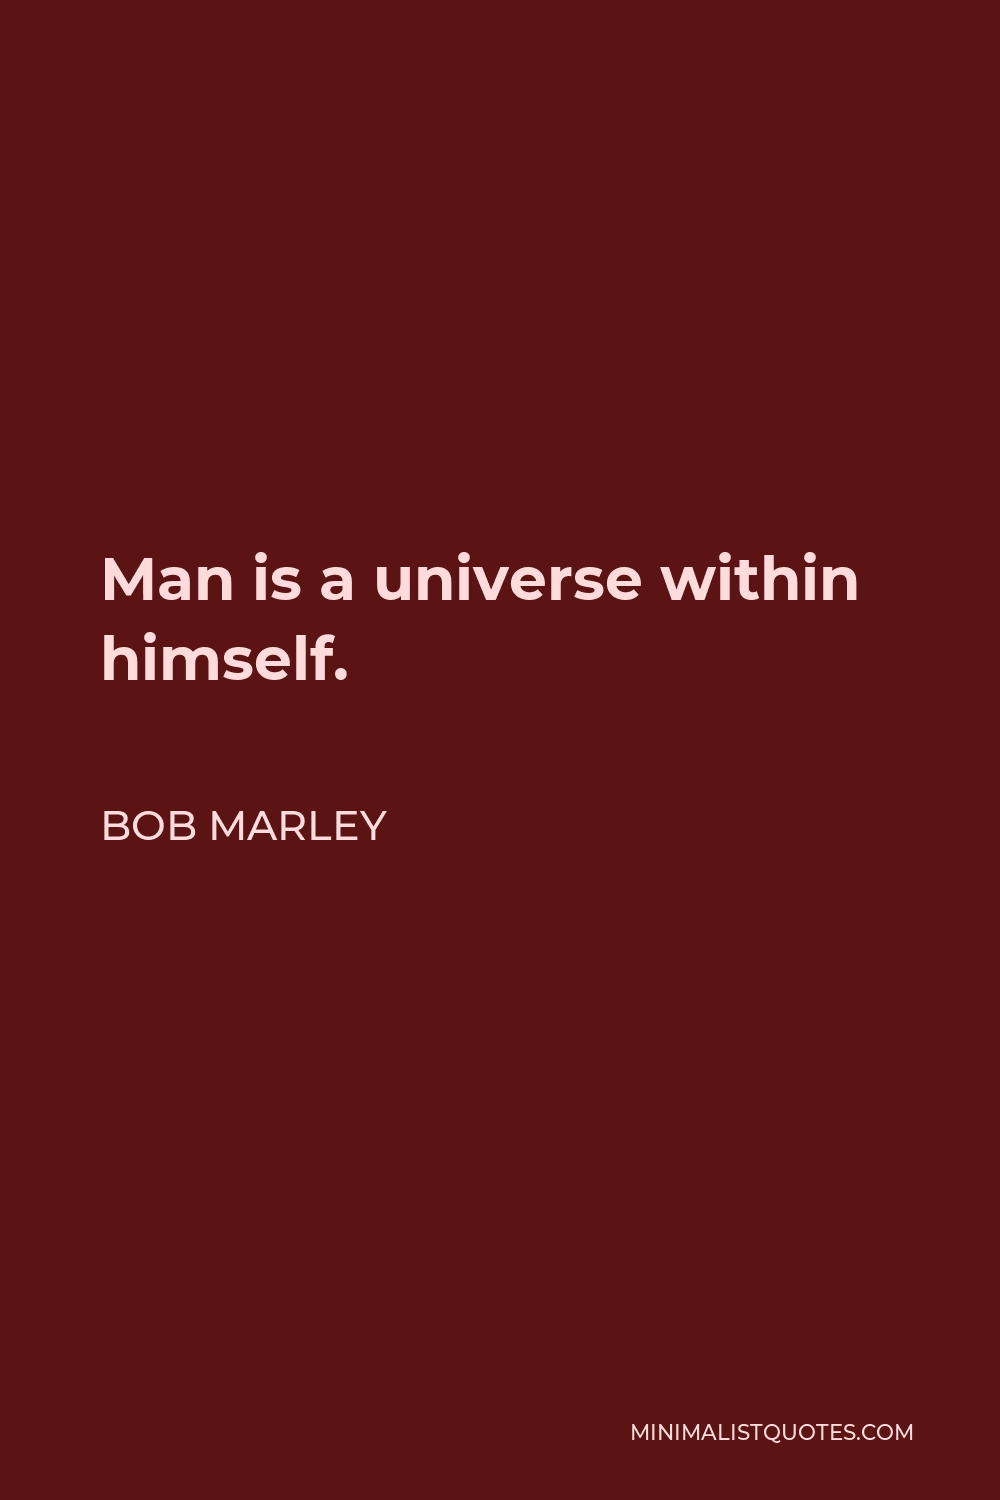 Bob Marley Quote - Man is a universe within himself.